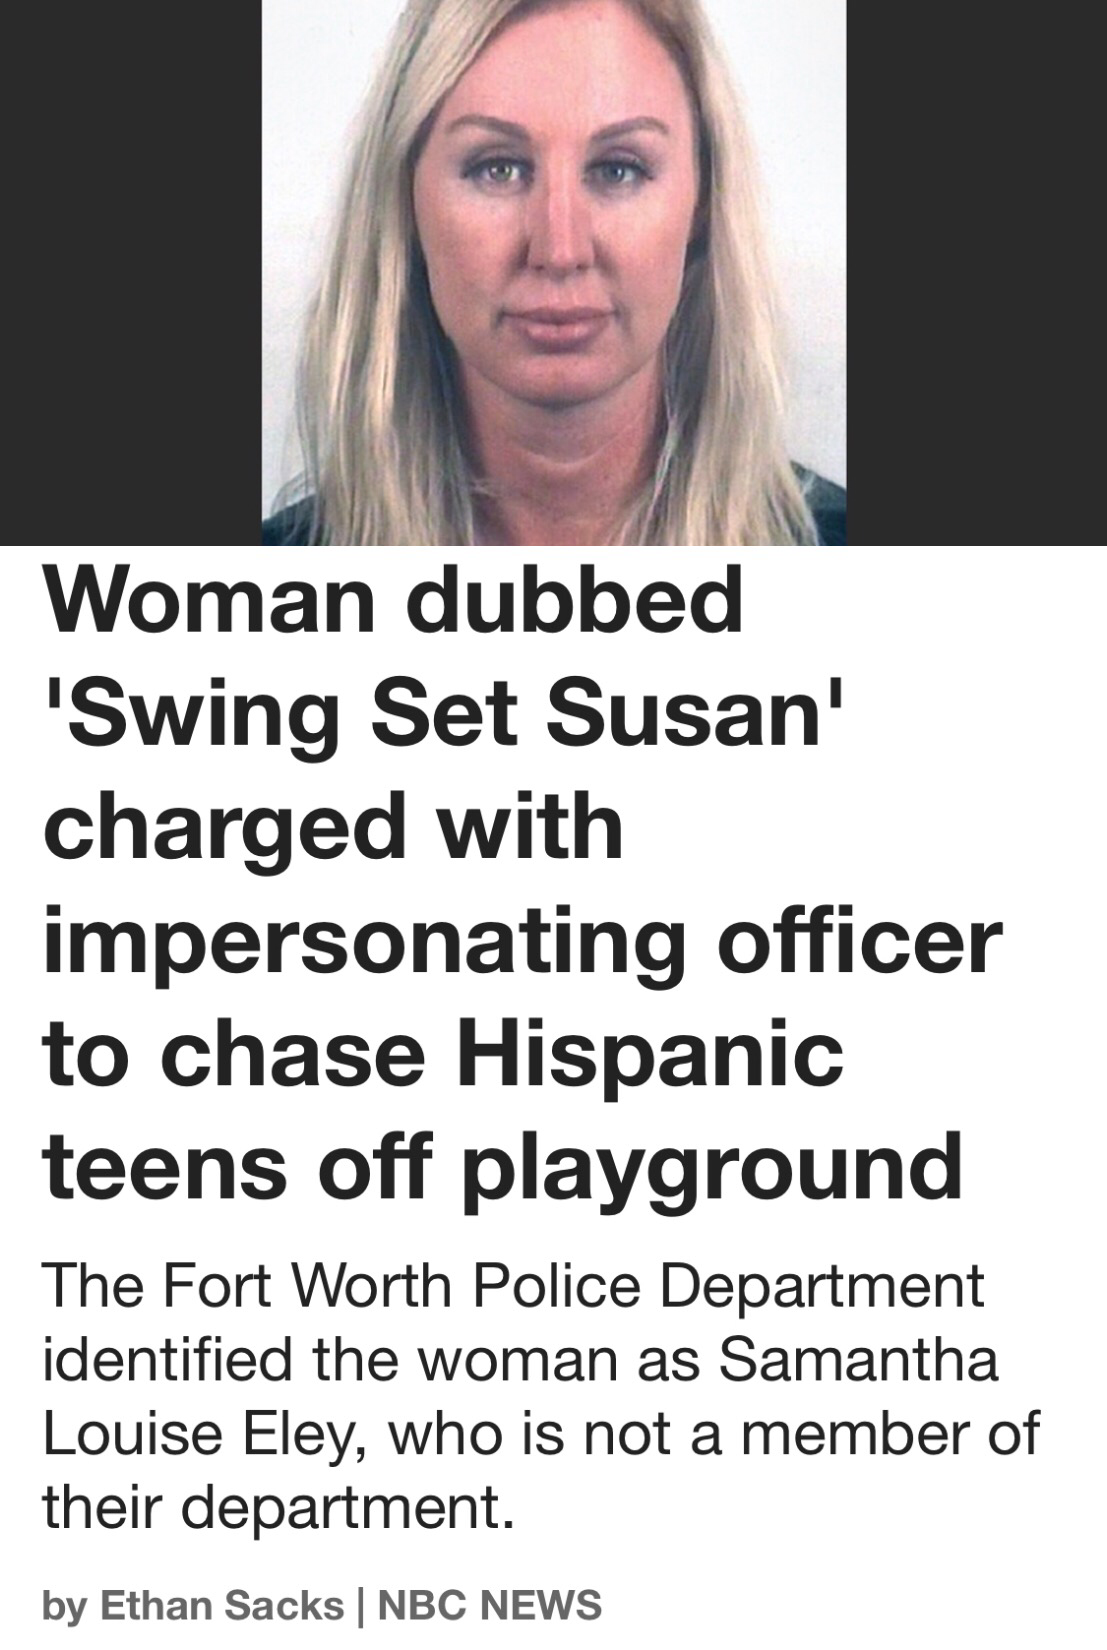 beauty - Woman dubbed 'Swing Set Susan' charged with impersonating officer to chase Hispanic teens off playground The Fort Worth Police Department identified the woman as Samantha Louise Eley, who is not a member of their department. by Ethan Sacks | Nbc 